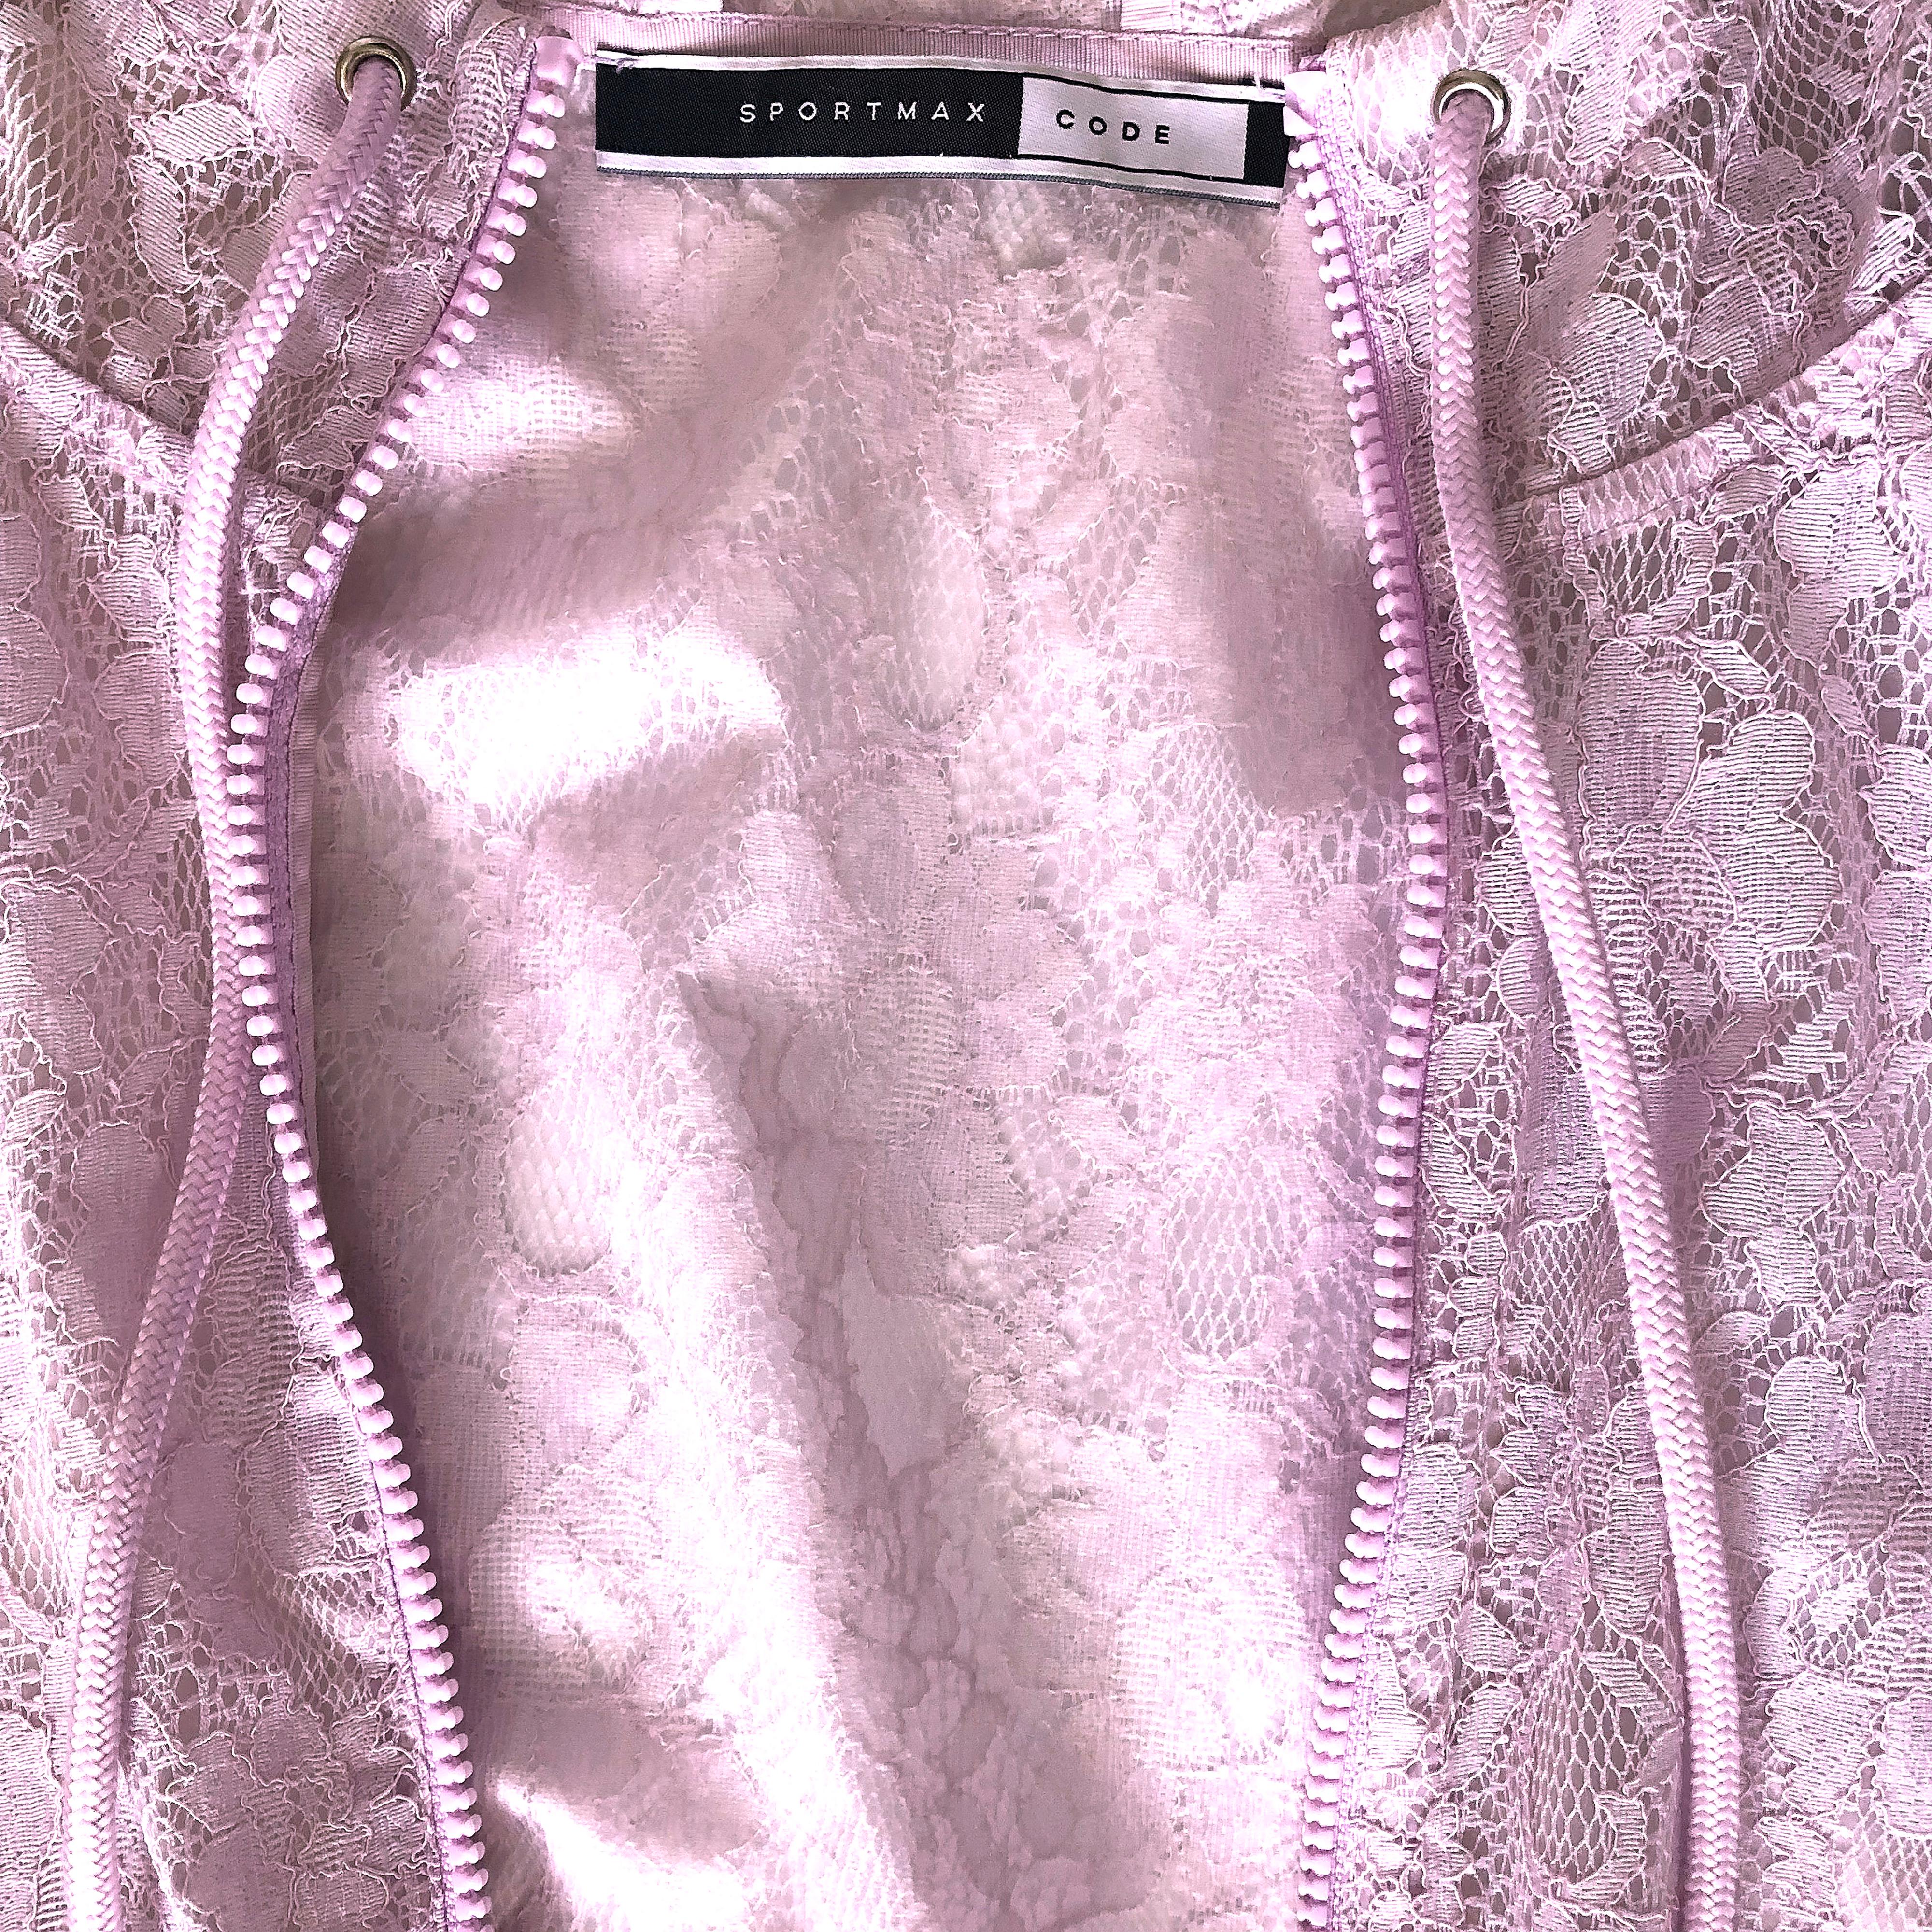 Sportmax Code - Lace Rain Jacket - Waterproof Lilac Lace - Hooded   In Good Condition For Sale In KENT, GB